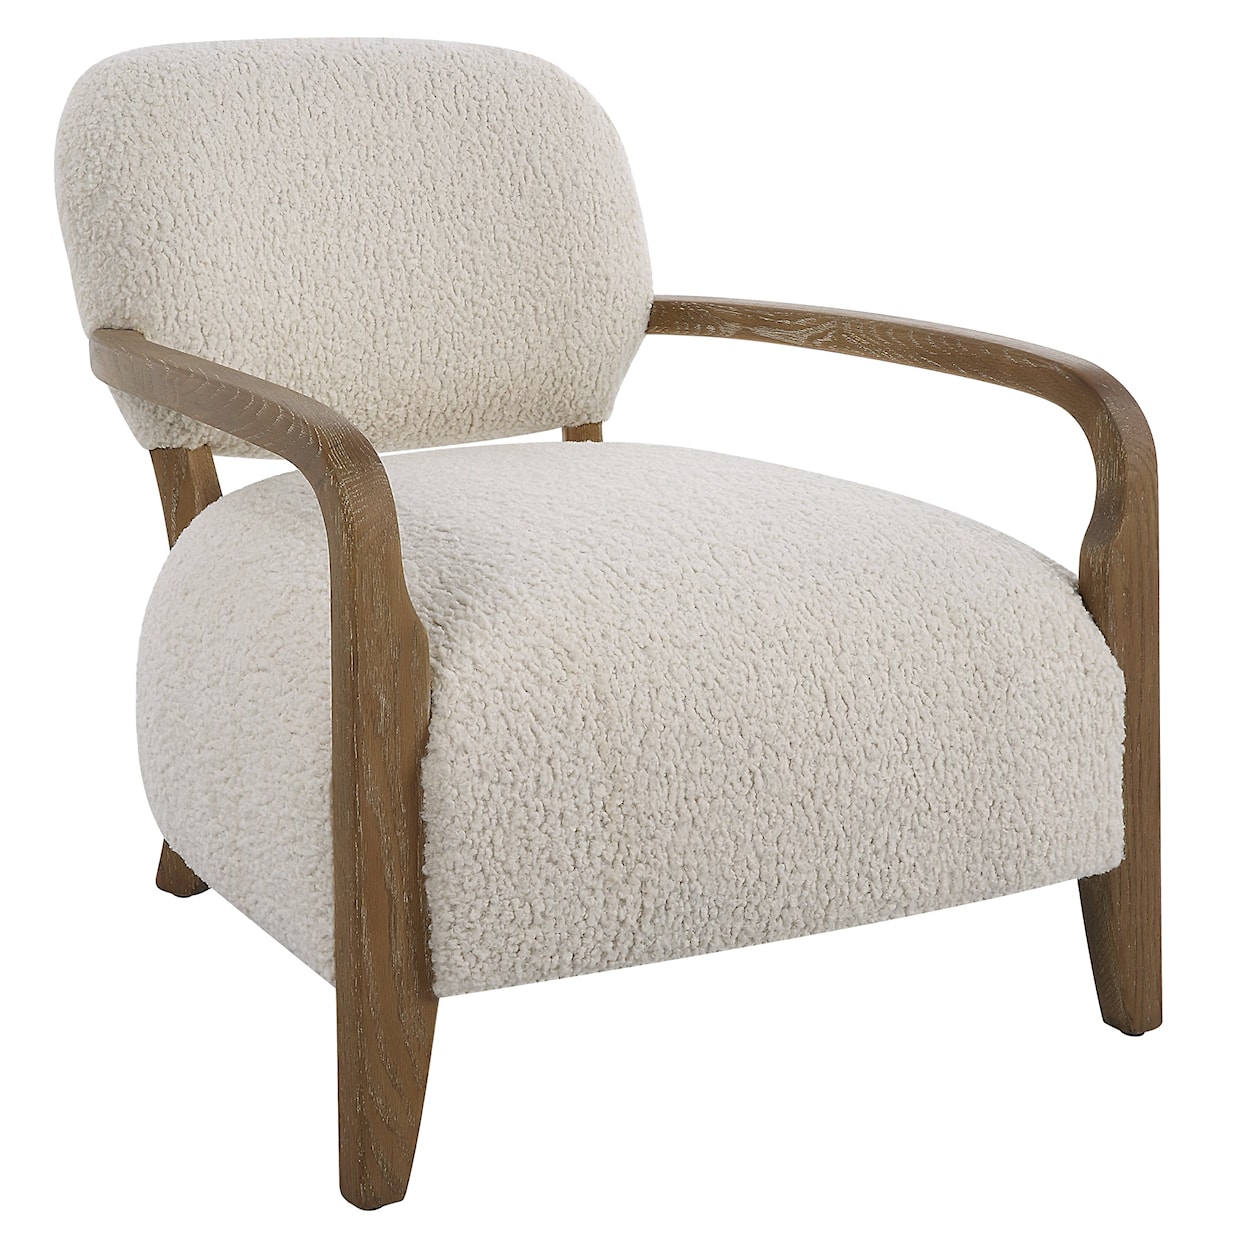 Uttermost Telluride Telluride Natural Shearling Accent Chair